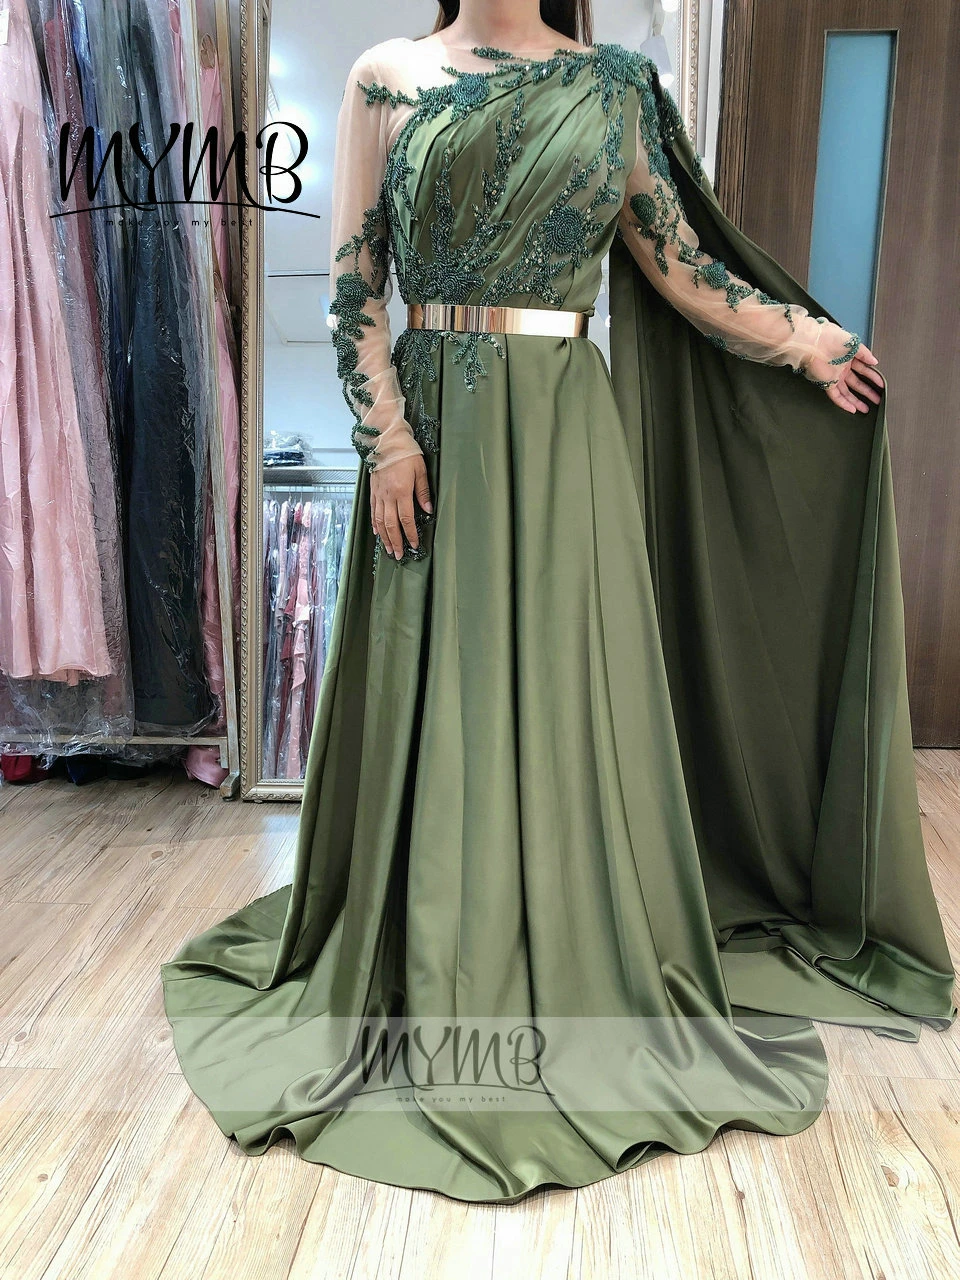 Luxury Haute Couture Wedding Dress For Women Party Emerald Green ...